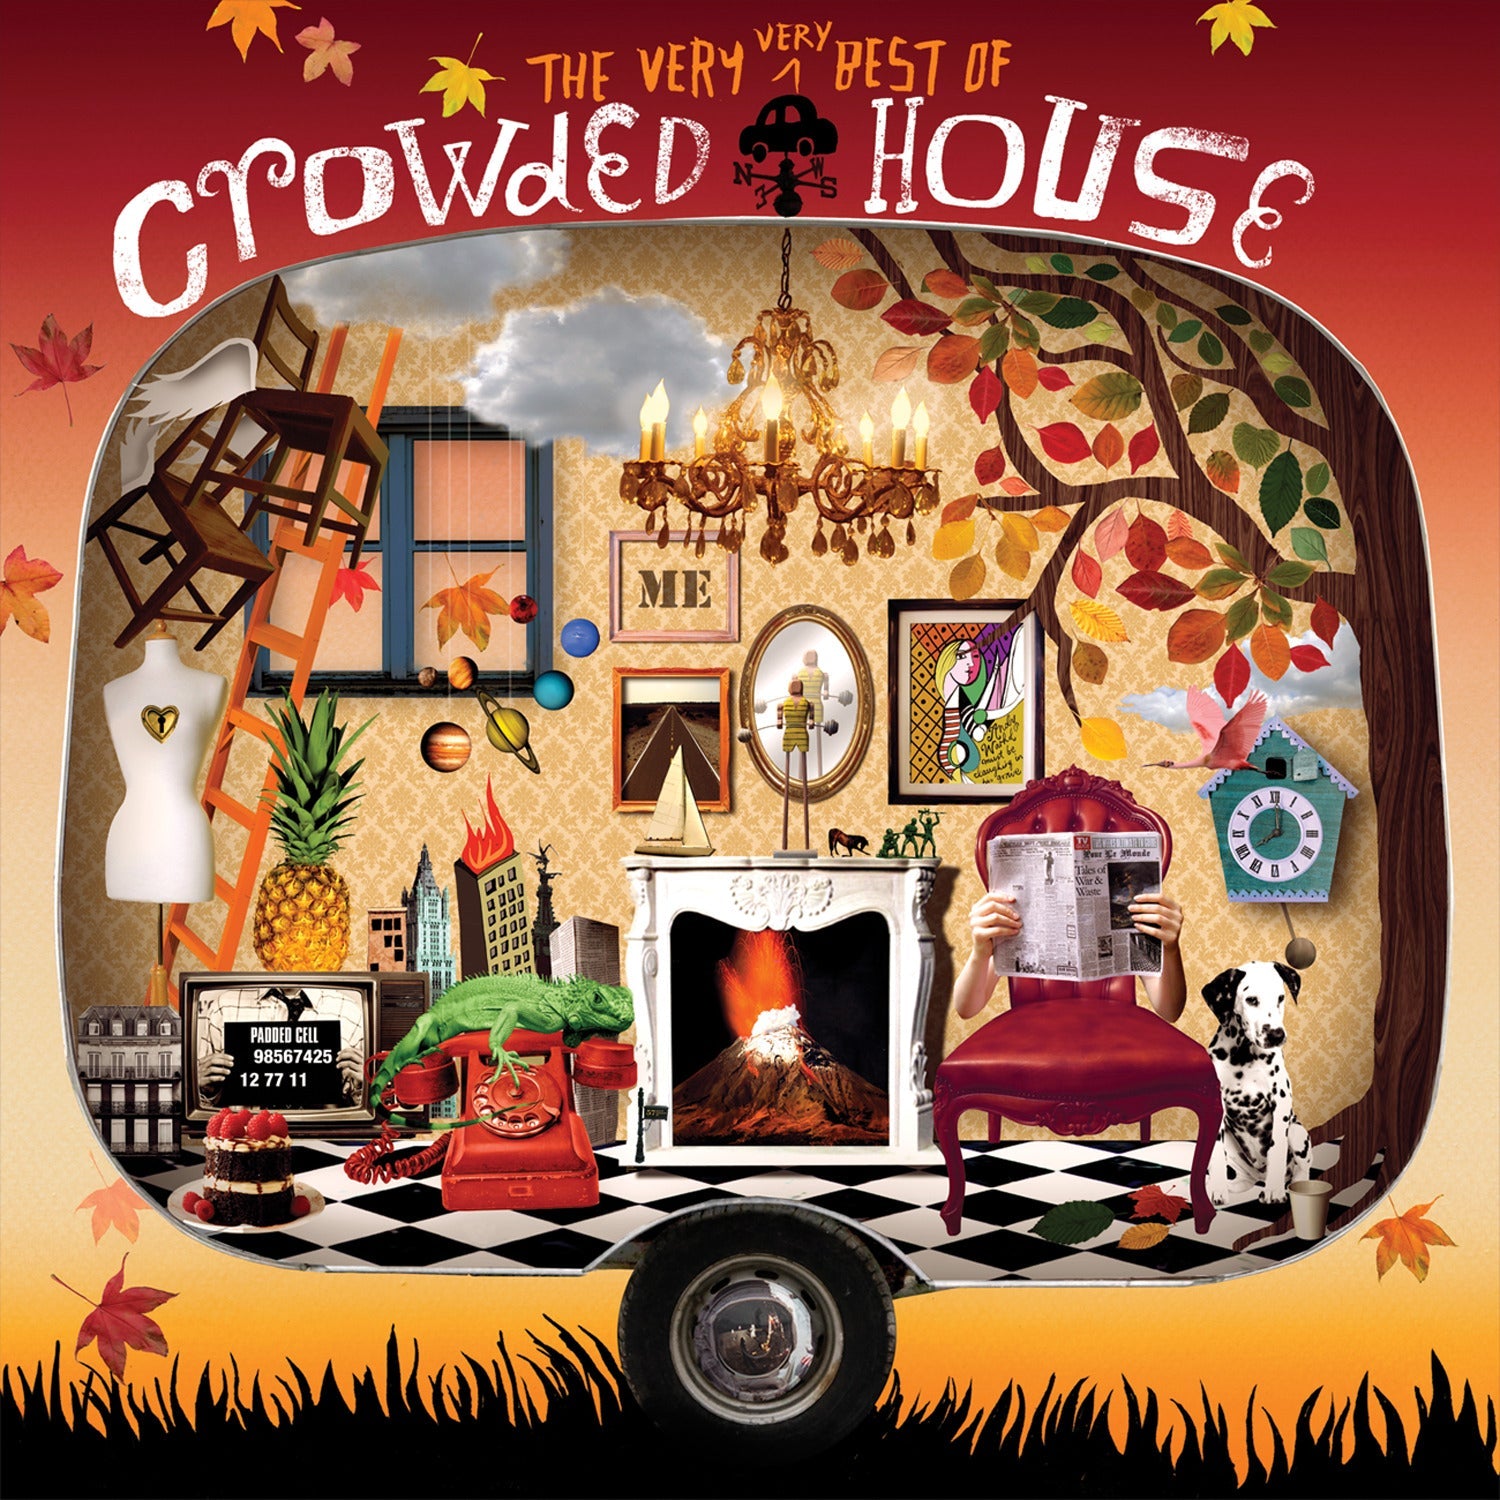 Crowded House - Crowded House - The Very Very Best - CD Album - SILBERSHELL